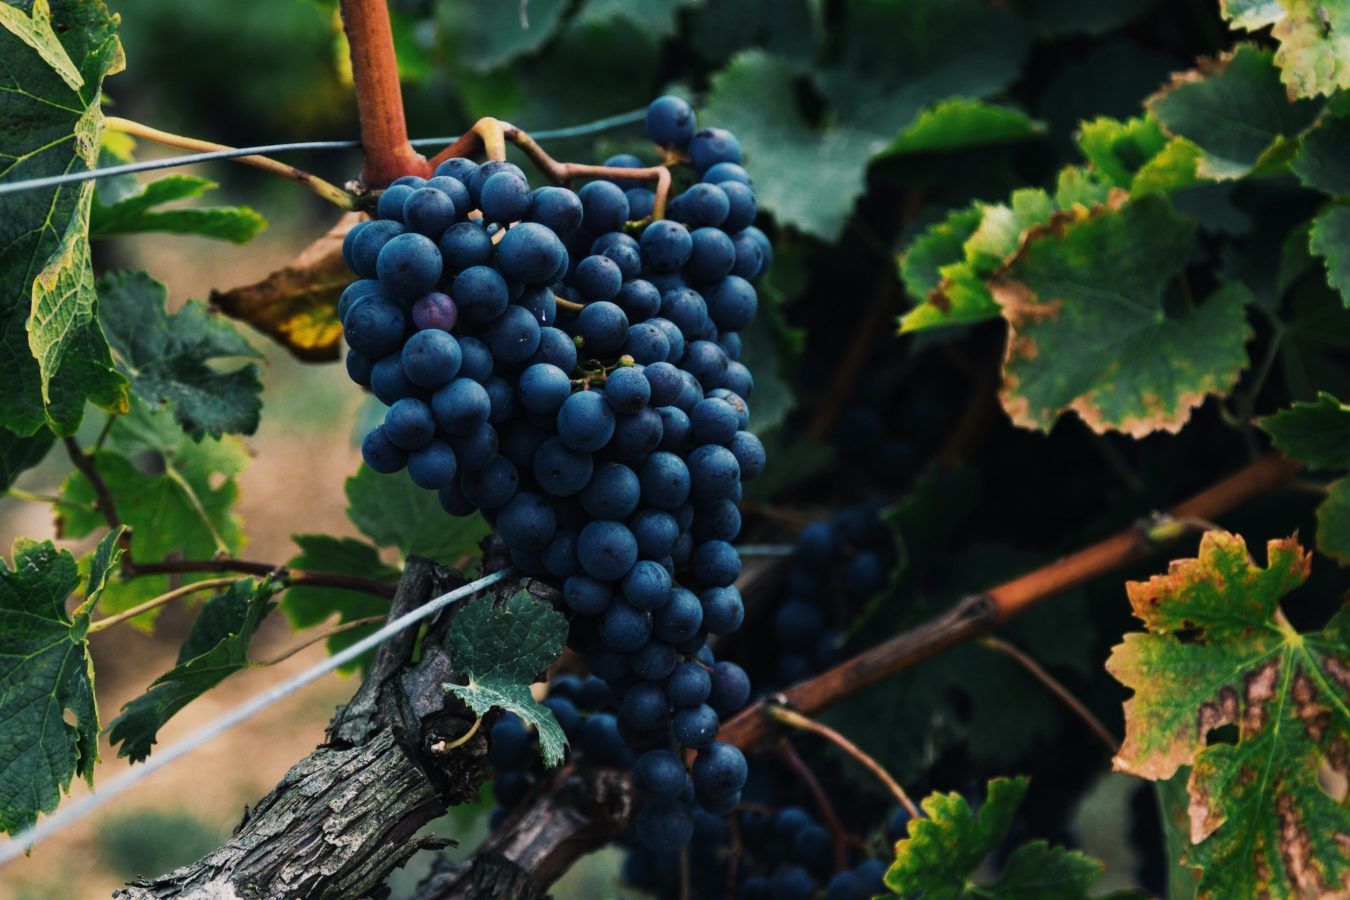 How traits in some grape varieties could help wine withstand climate change